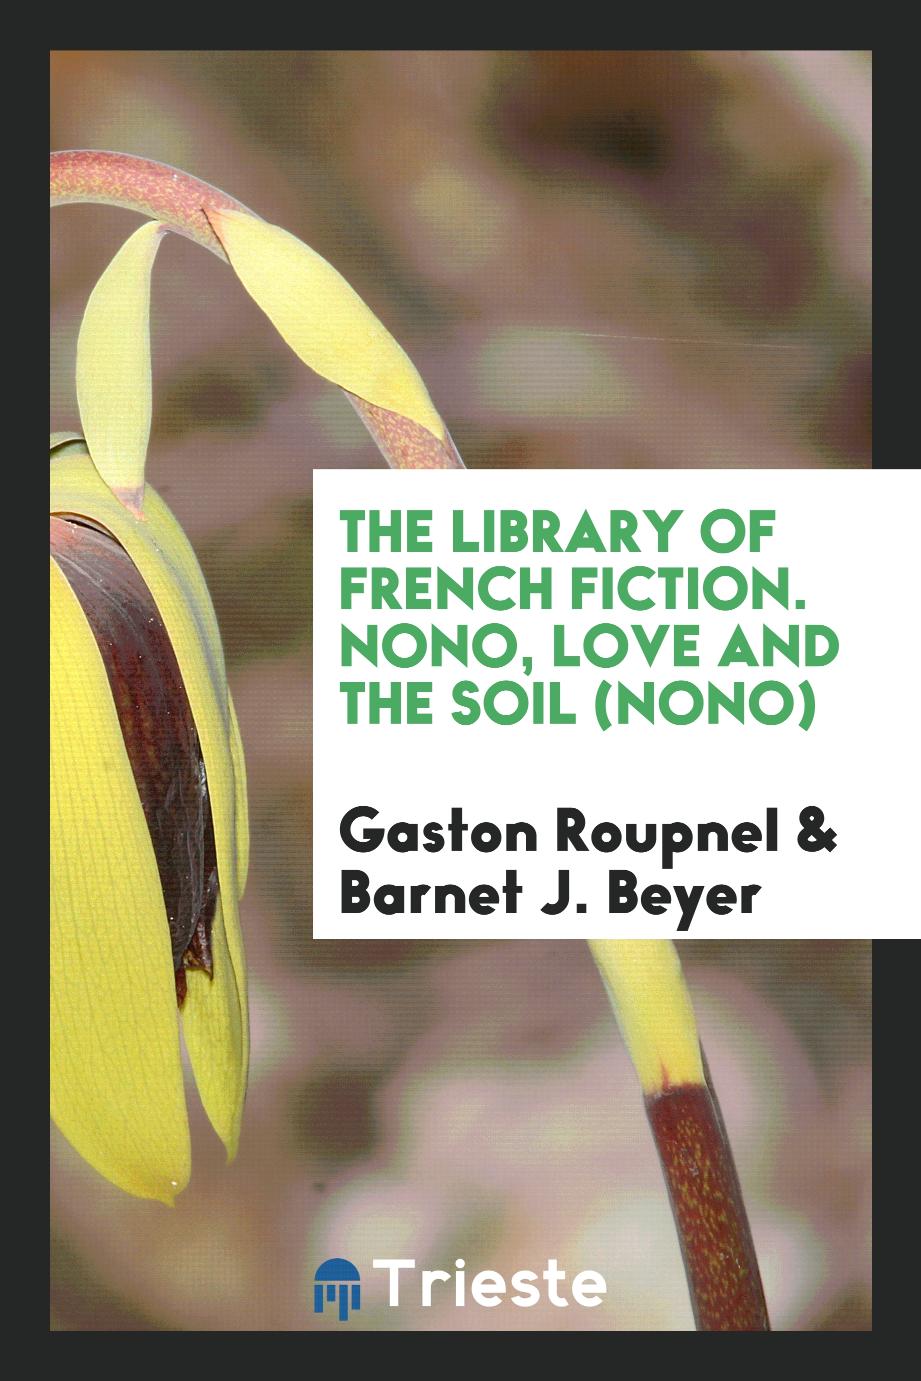 The Library of French Fiction. Nono, Love and the Soil (Nono)